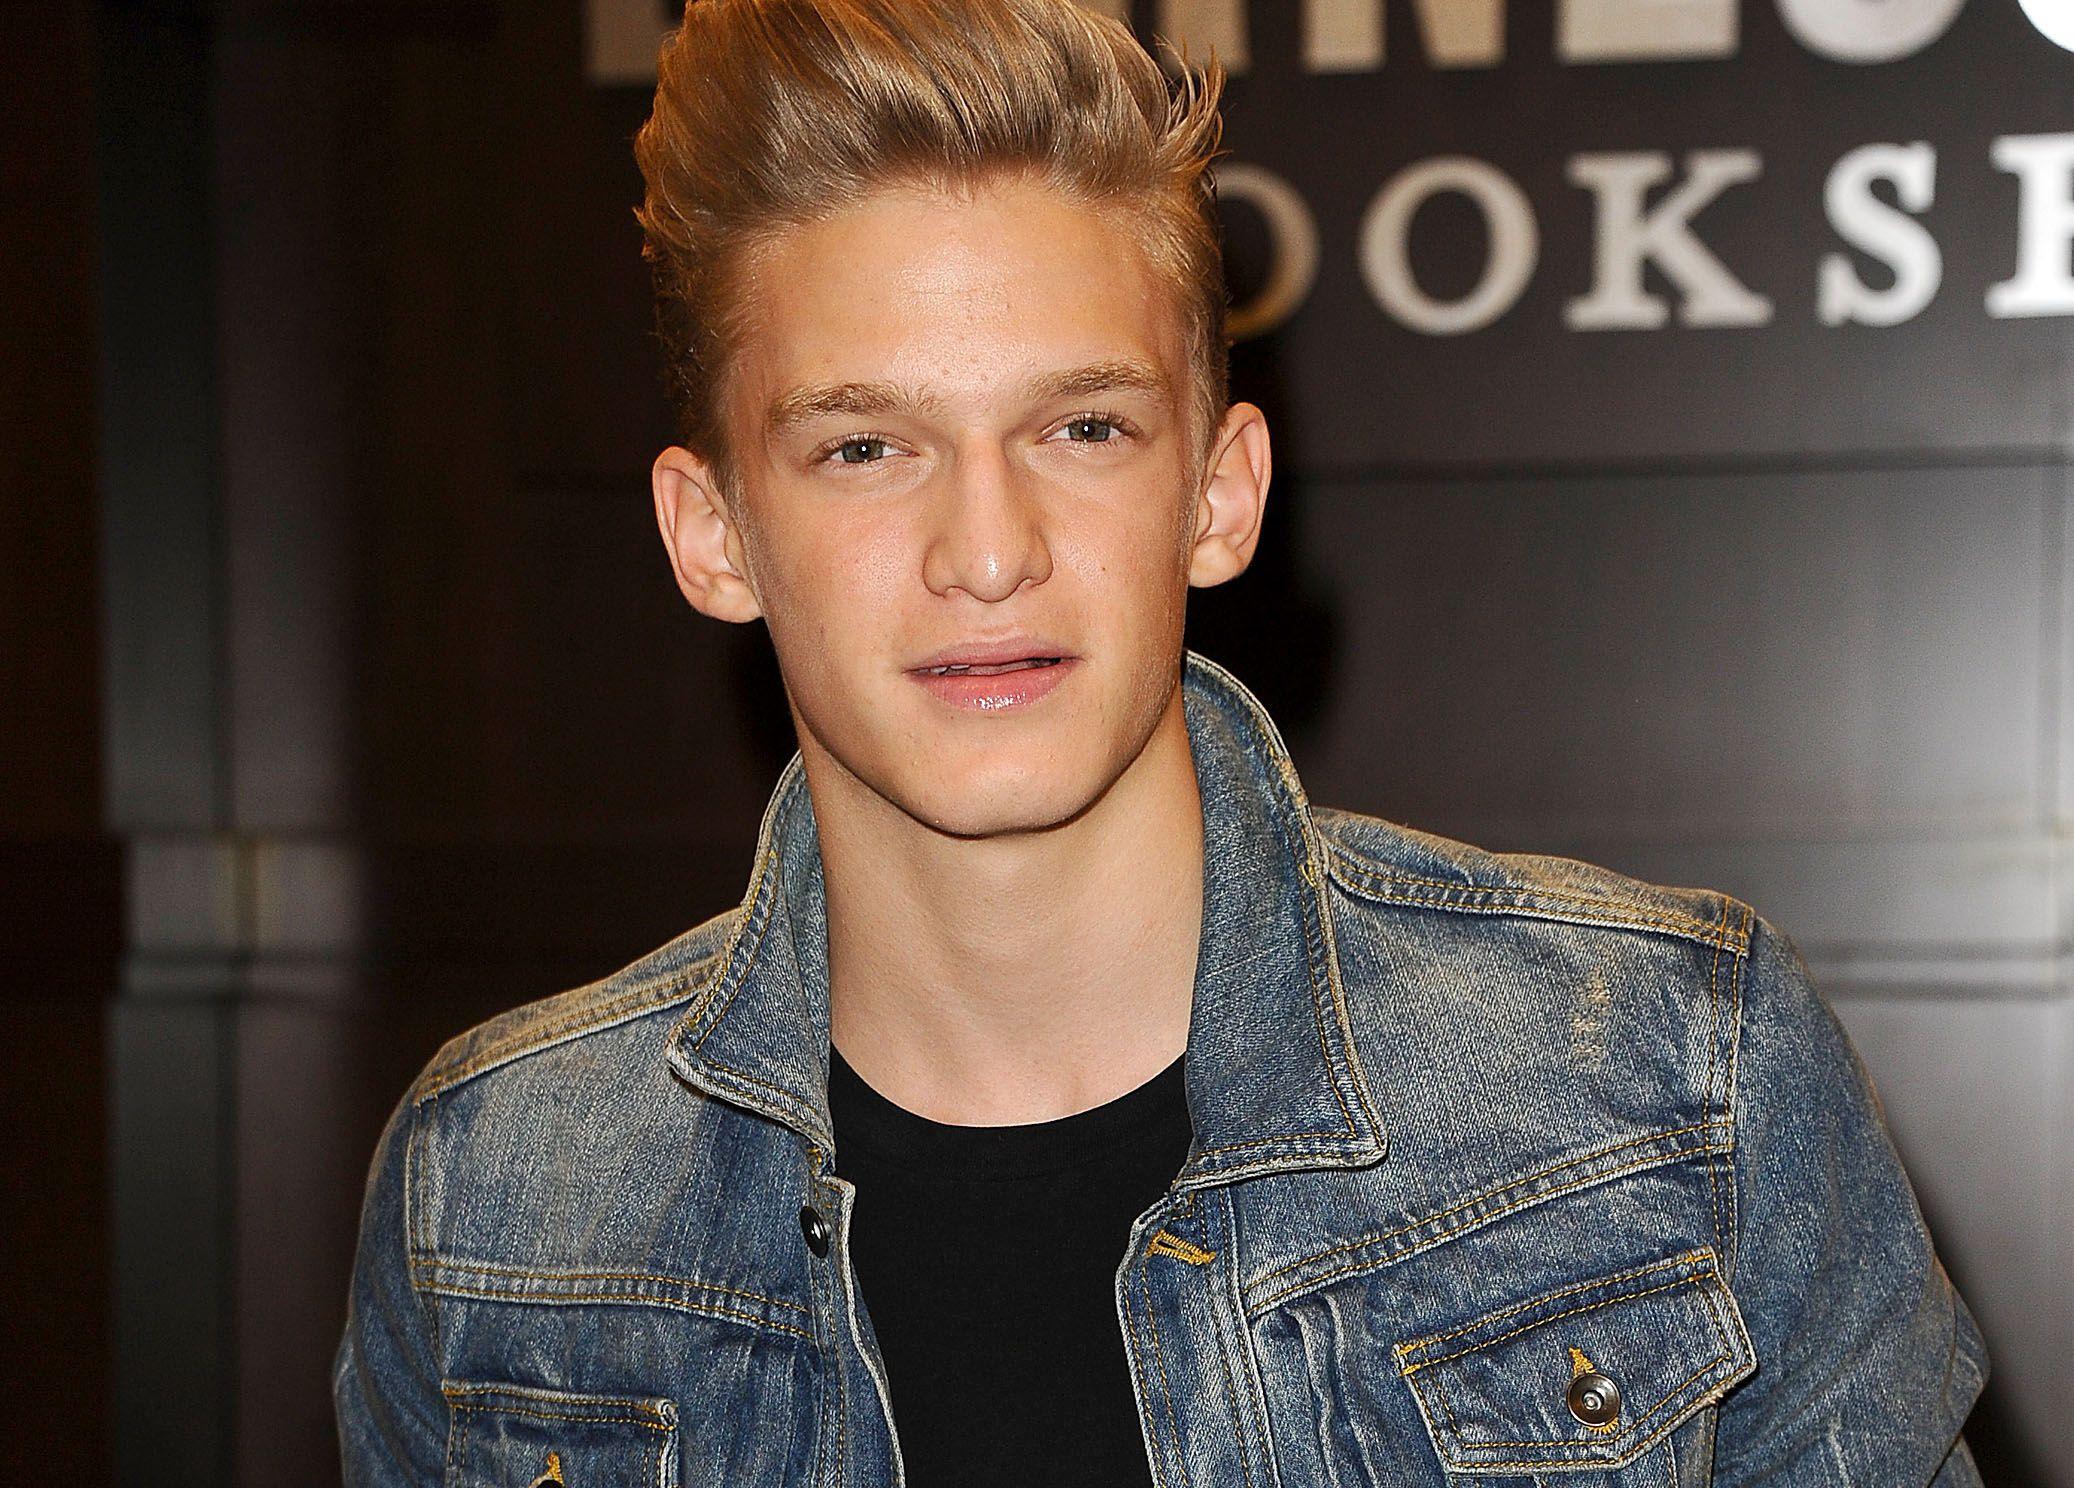 Check Out These Pics of Cody Simpson's Girlfriend!